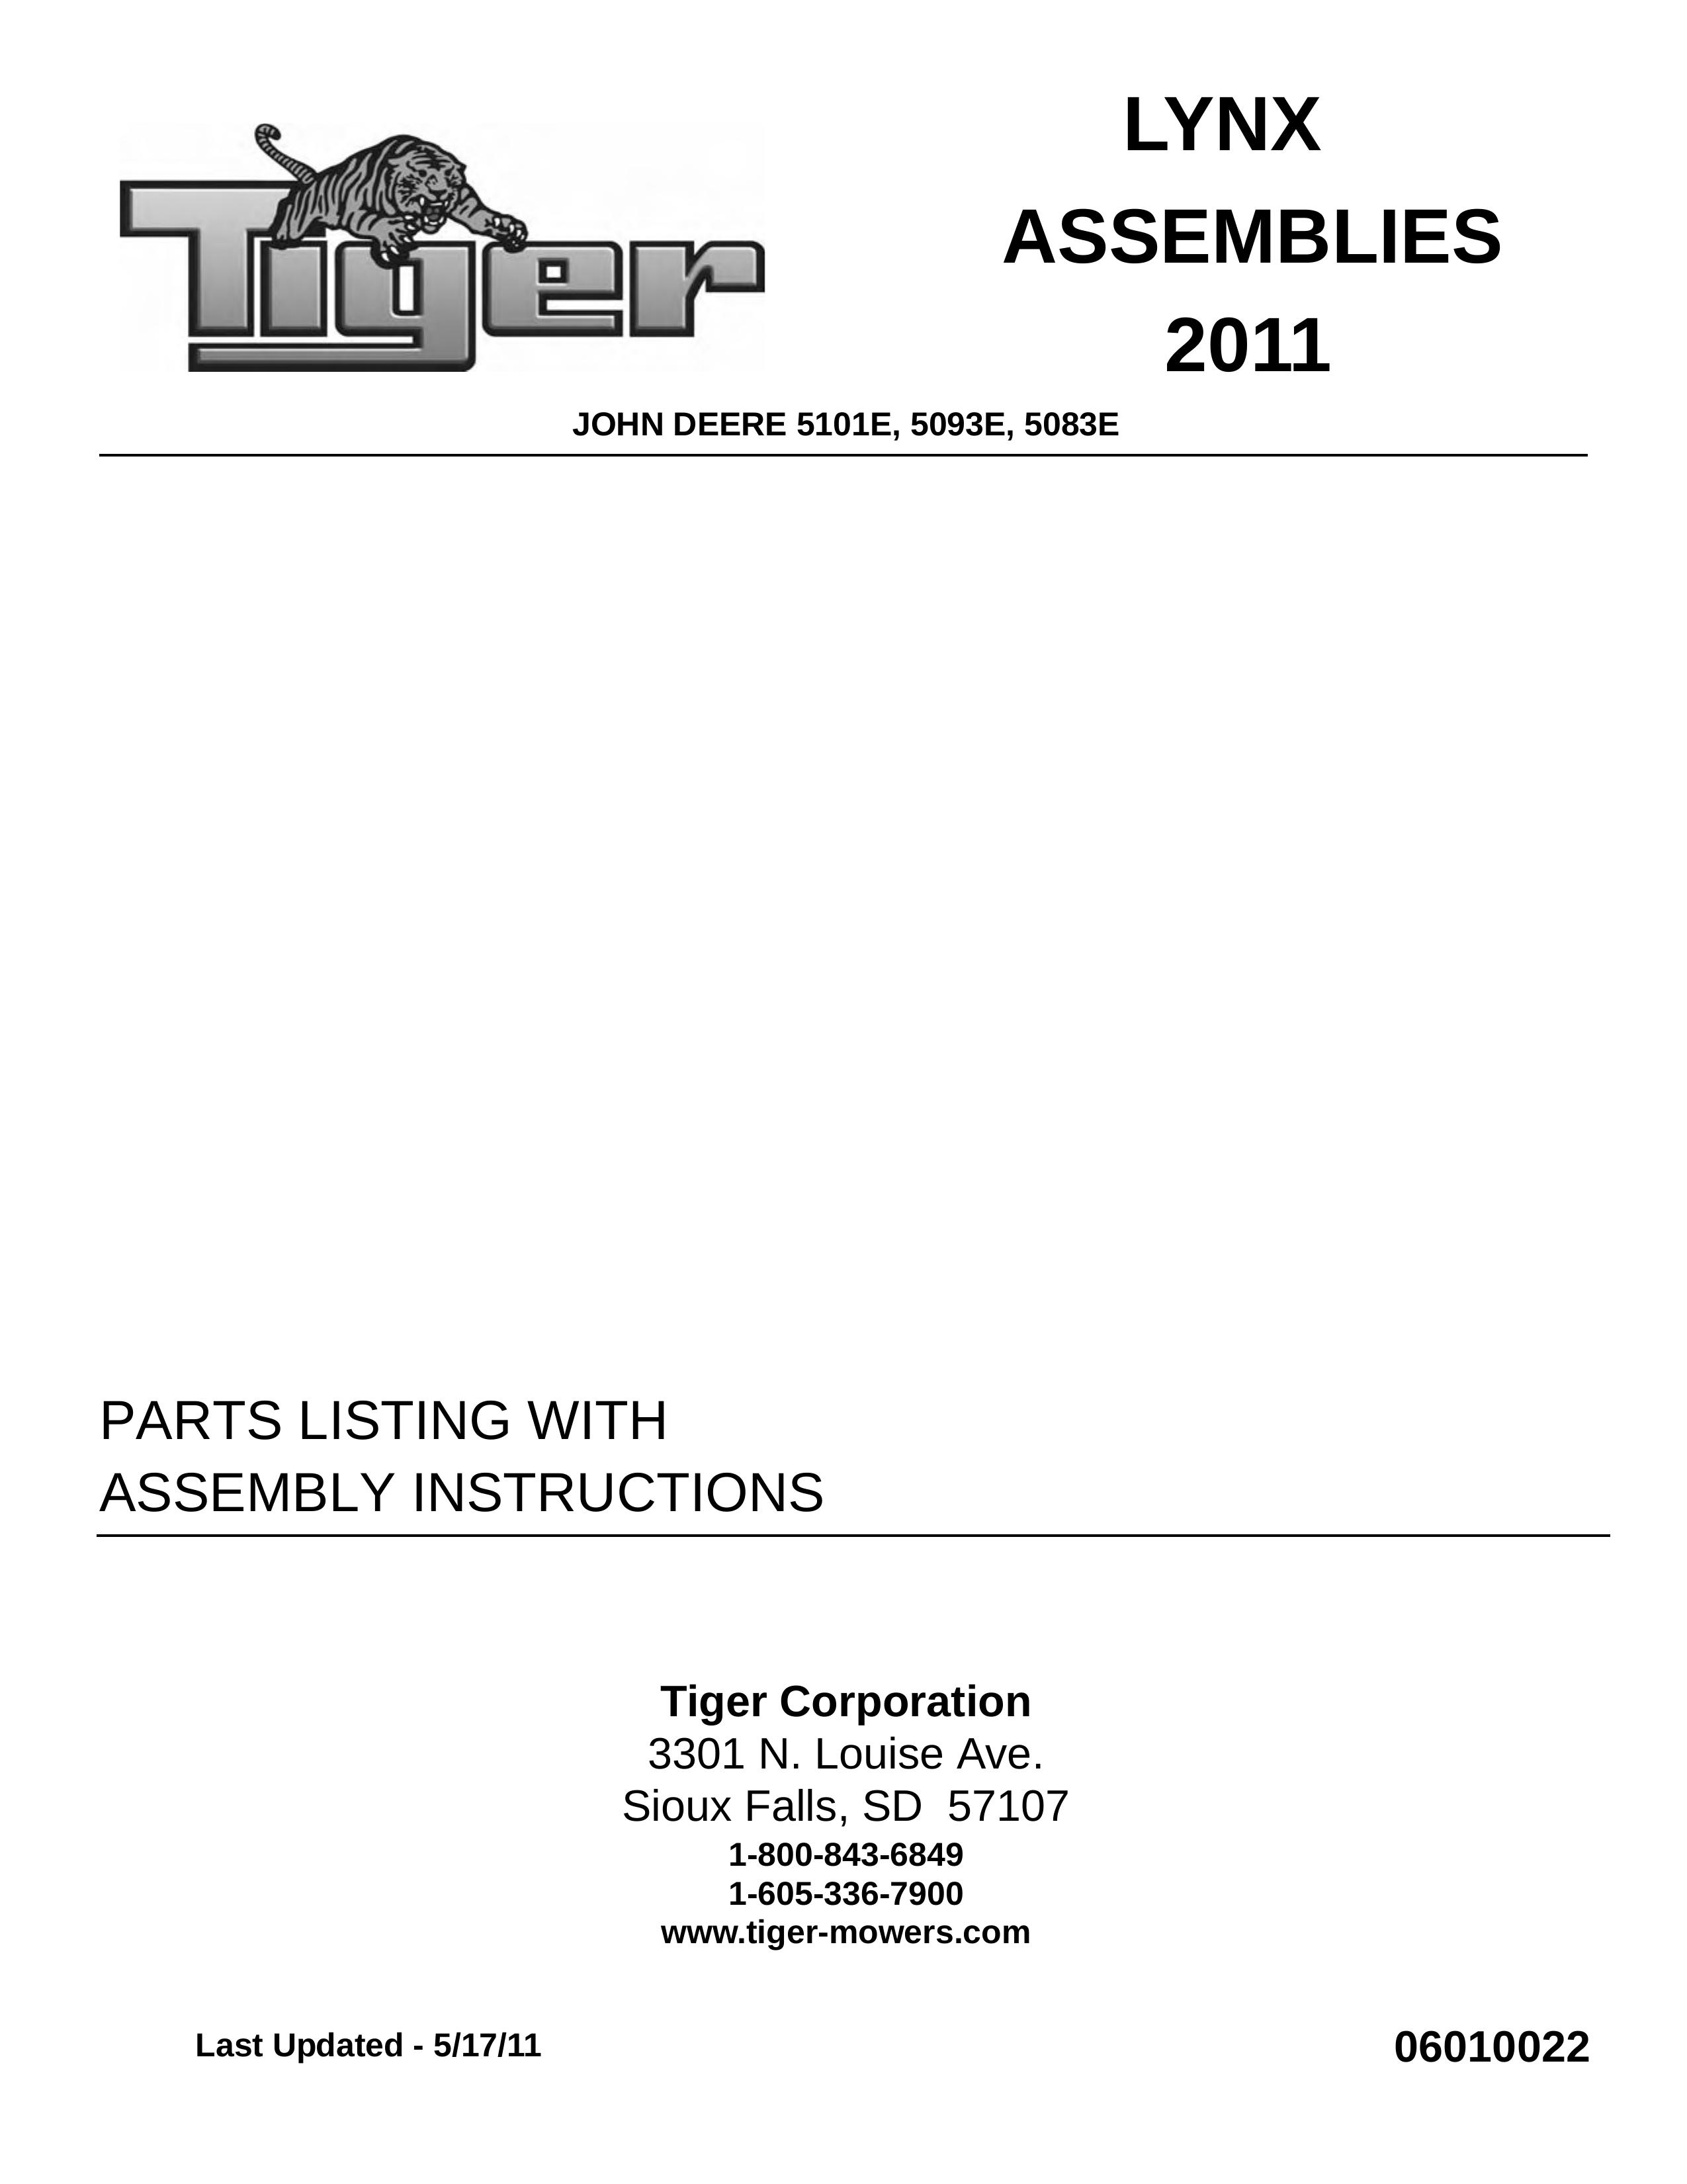 Tiger Products Co., Ltd 5101E Lawn Mower User Manual